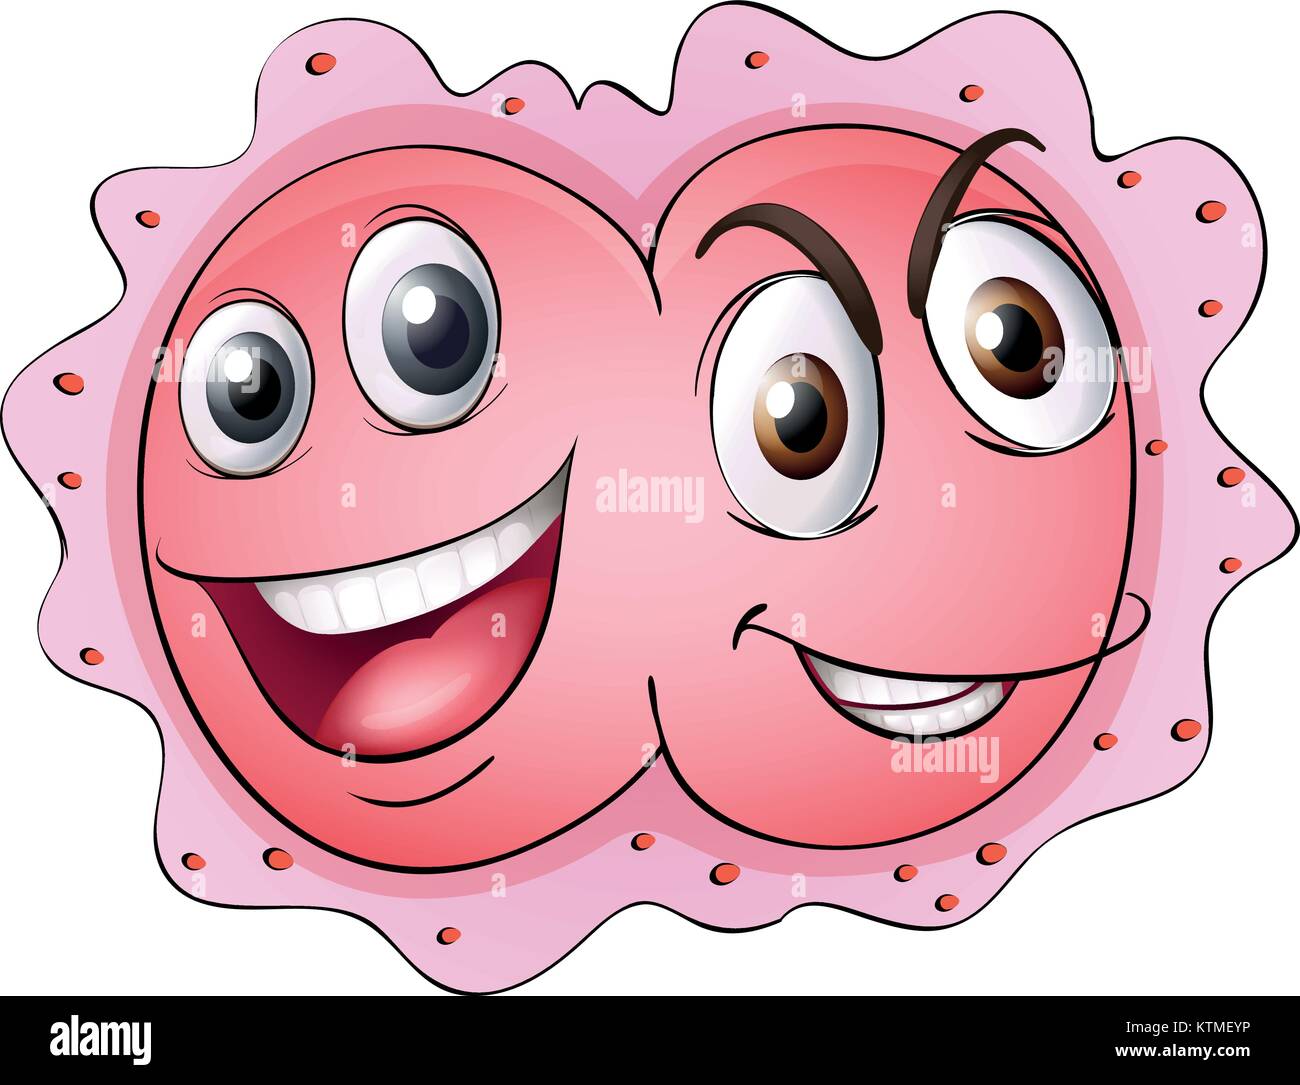 illustration of a monster face on a white background Stock Vector